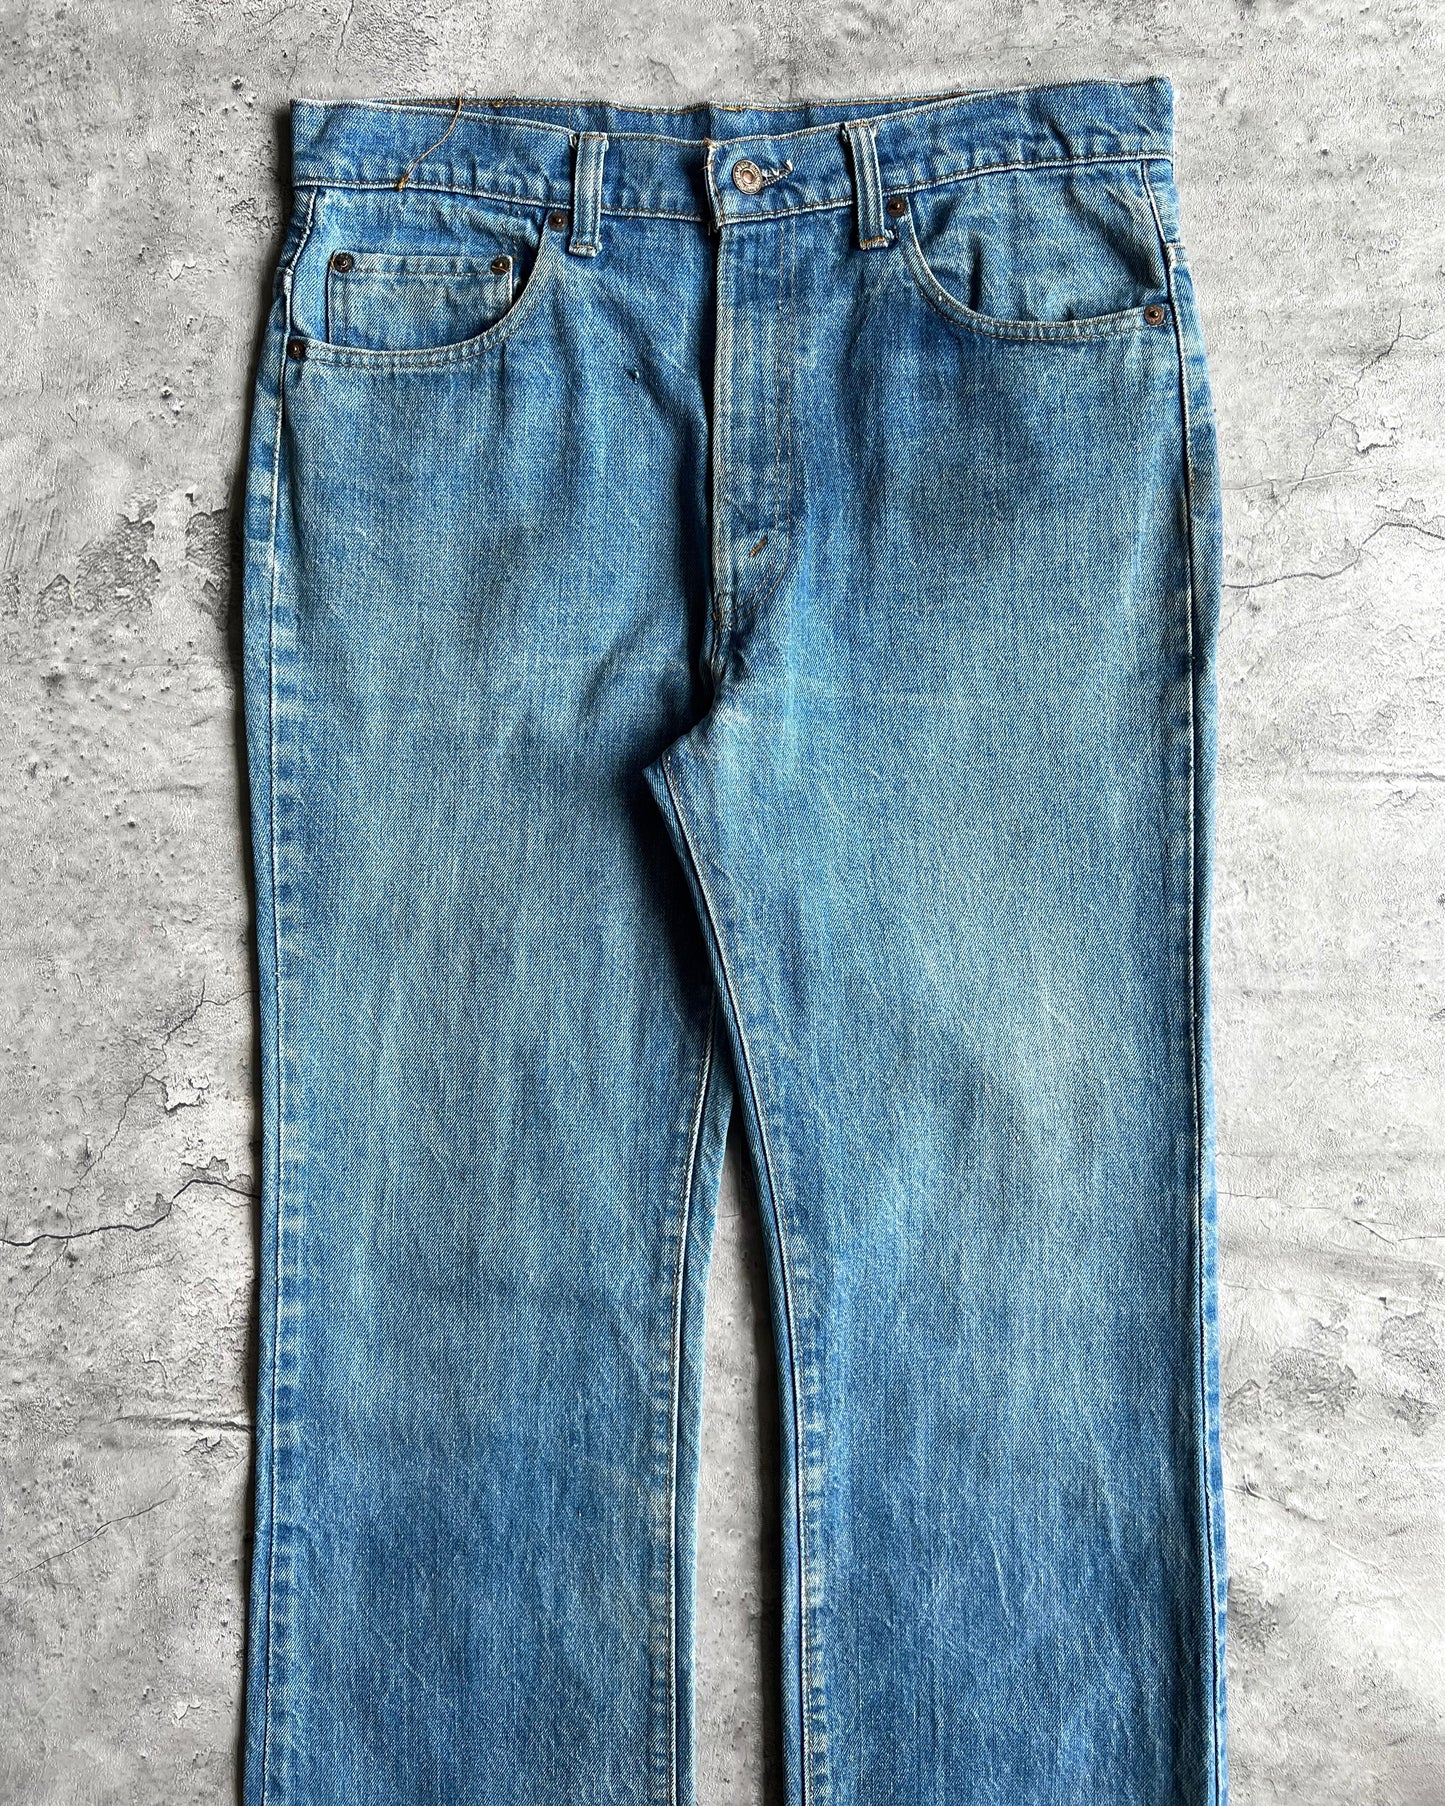 1980S MEDIUM WASHED LEVI'S 517 FLARE JEANS (34X33)